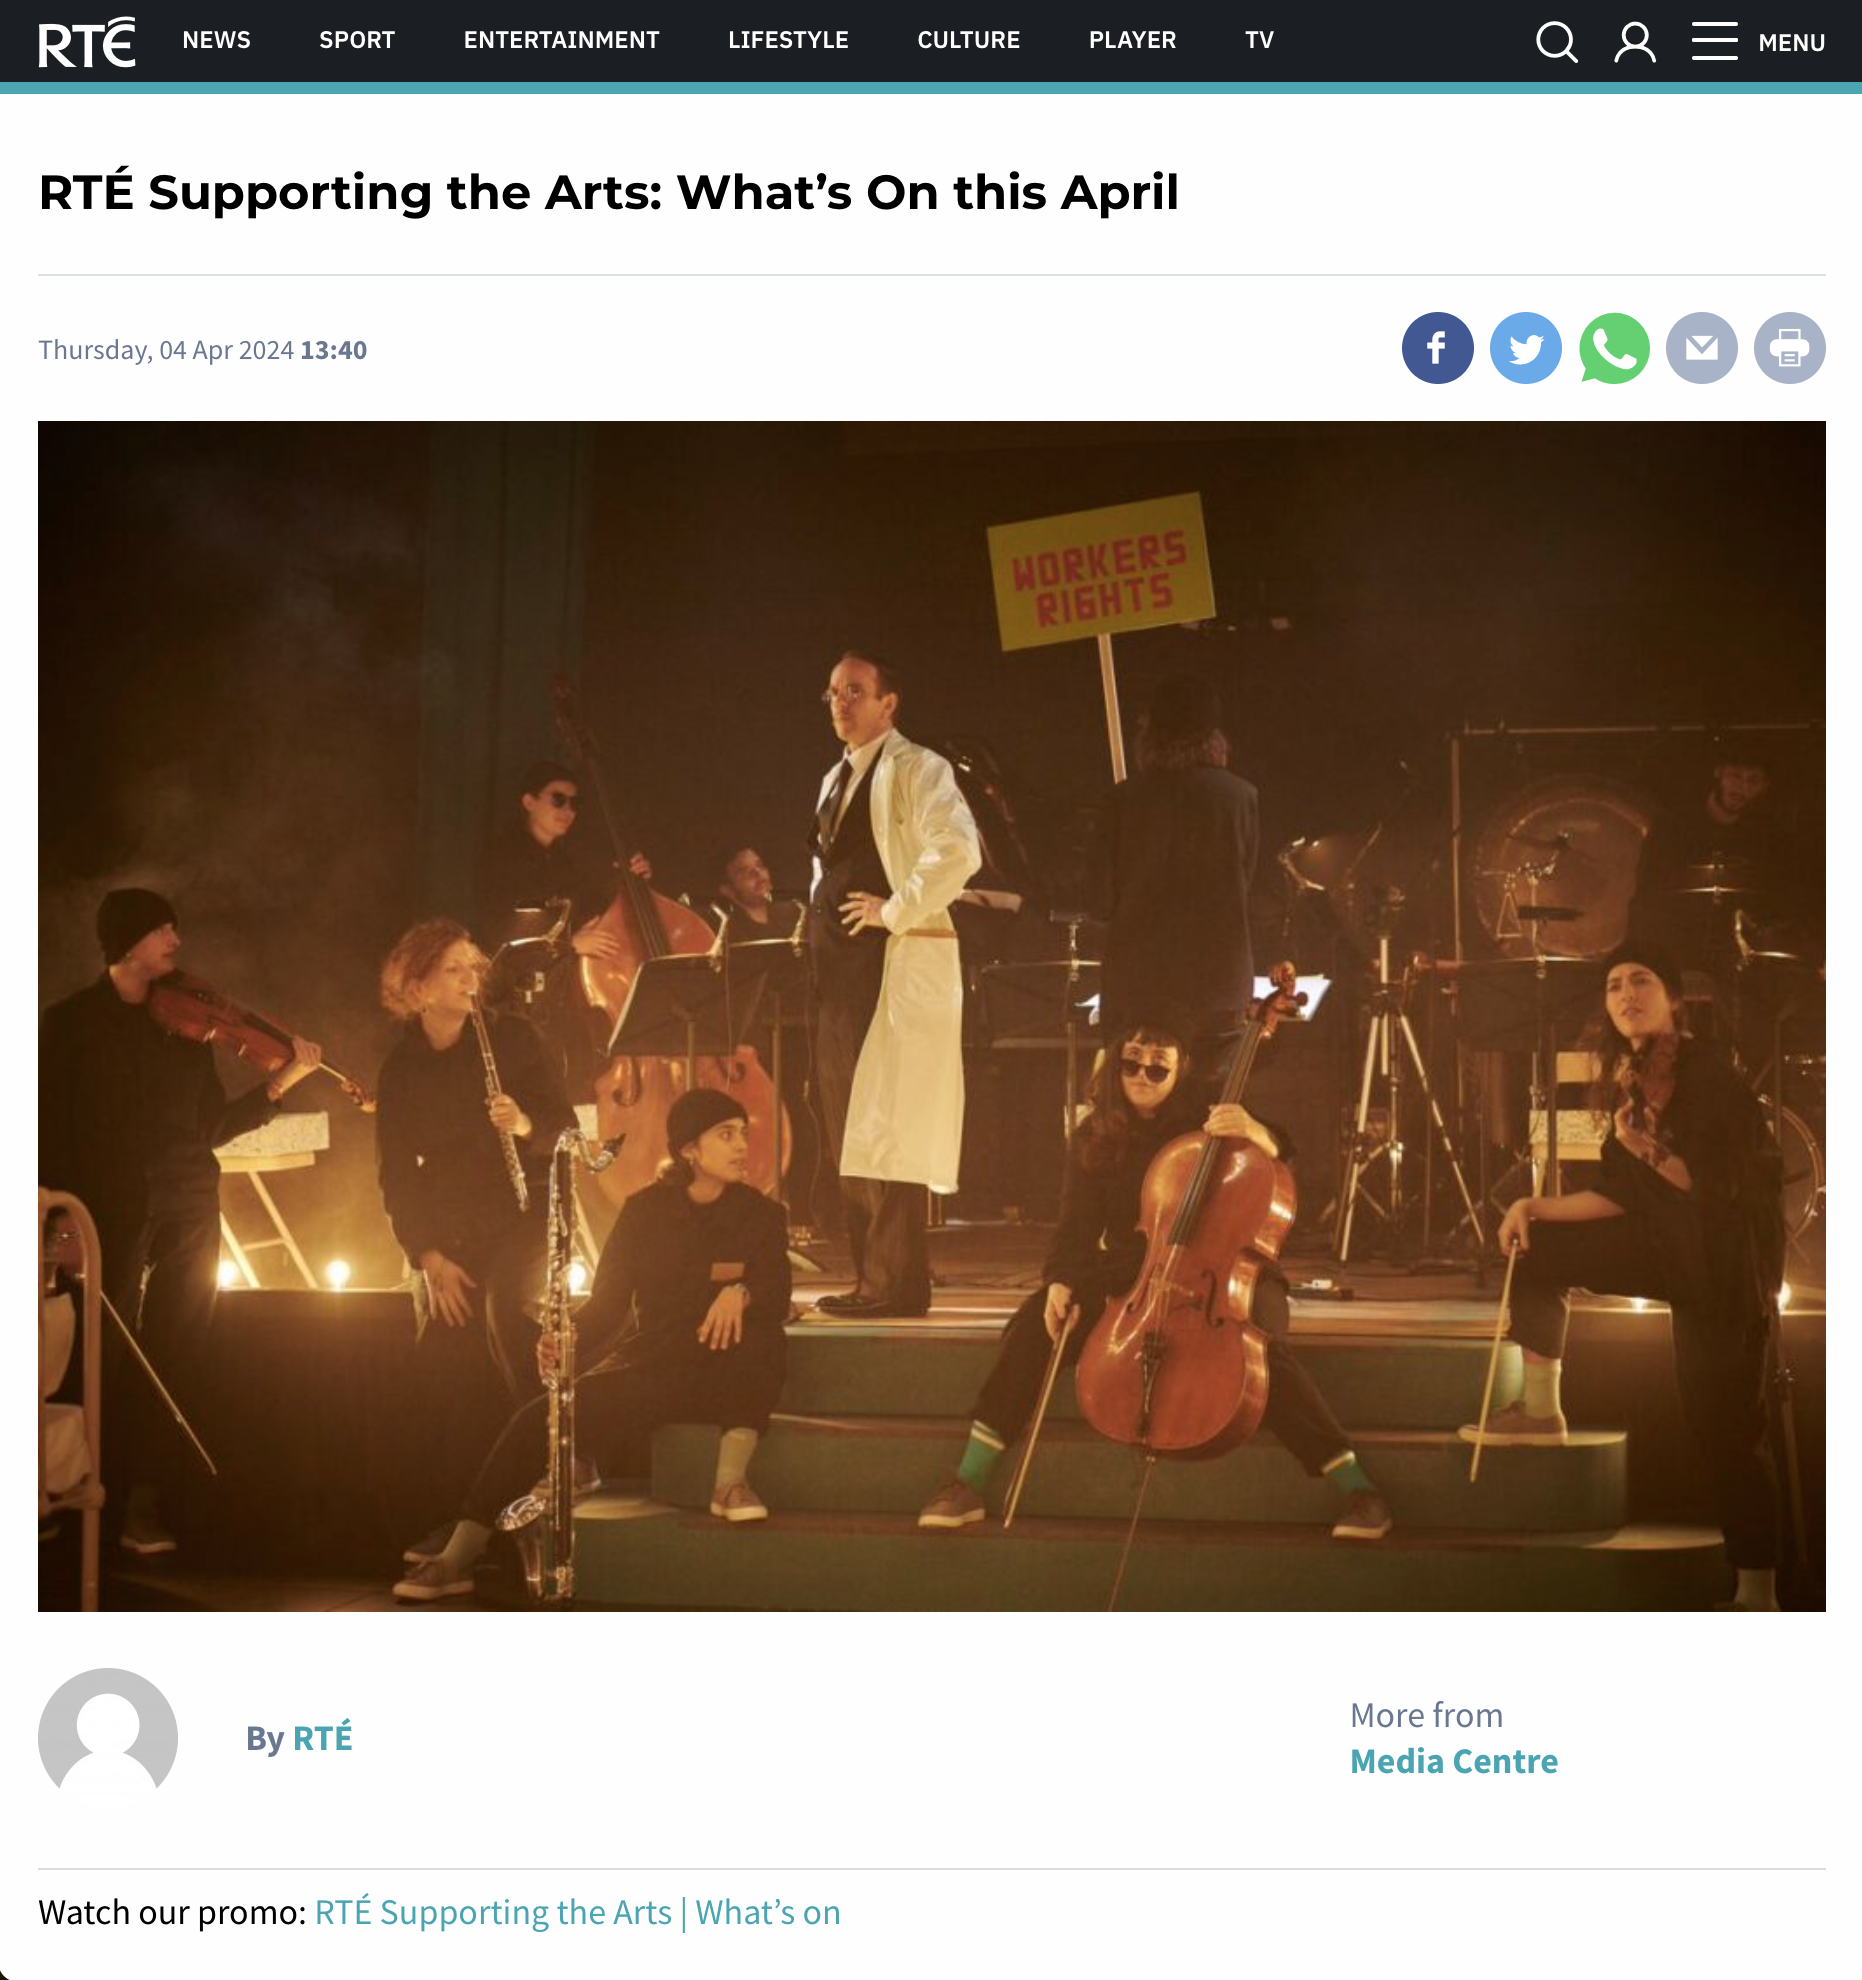 RTE - Supporting the Arts